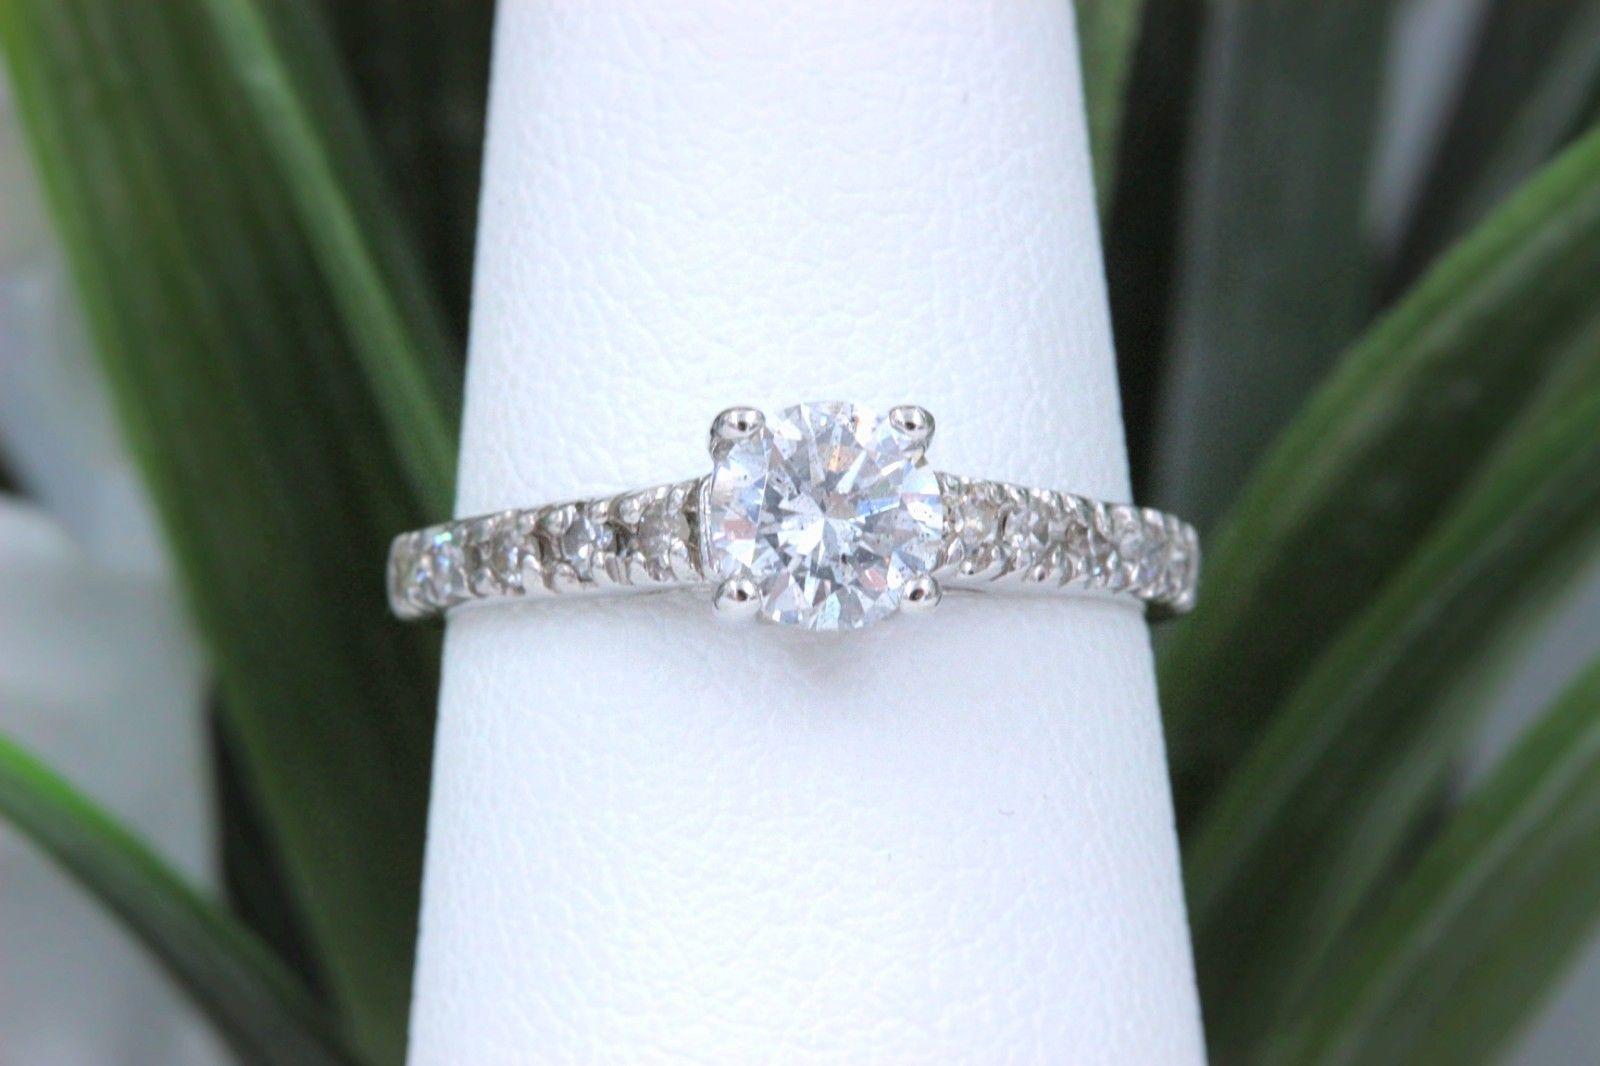 Diamond Engagement Ring 
Style:  Solitaire with Diamond Band
Metal:   14k White Gold
Size:  6- sizable
Total Carat Weight:  0.64 TCW
Center Diamond Shape:   Round Diamond 0.50 Cts
Diamond Color & Clarity:  J - SI3
Accent Diamonds:  10 Round Diamond